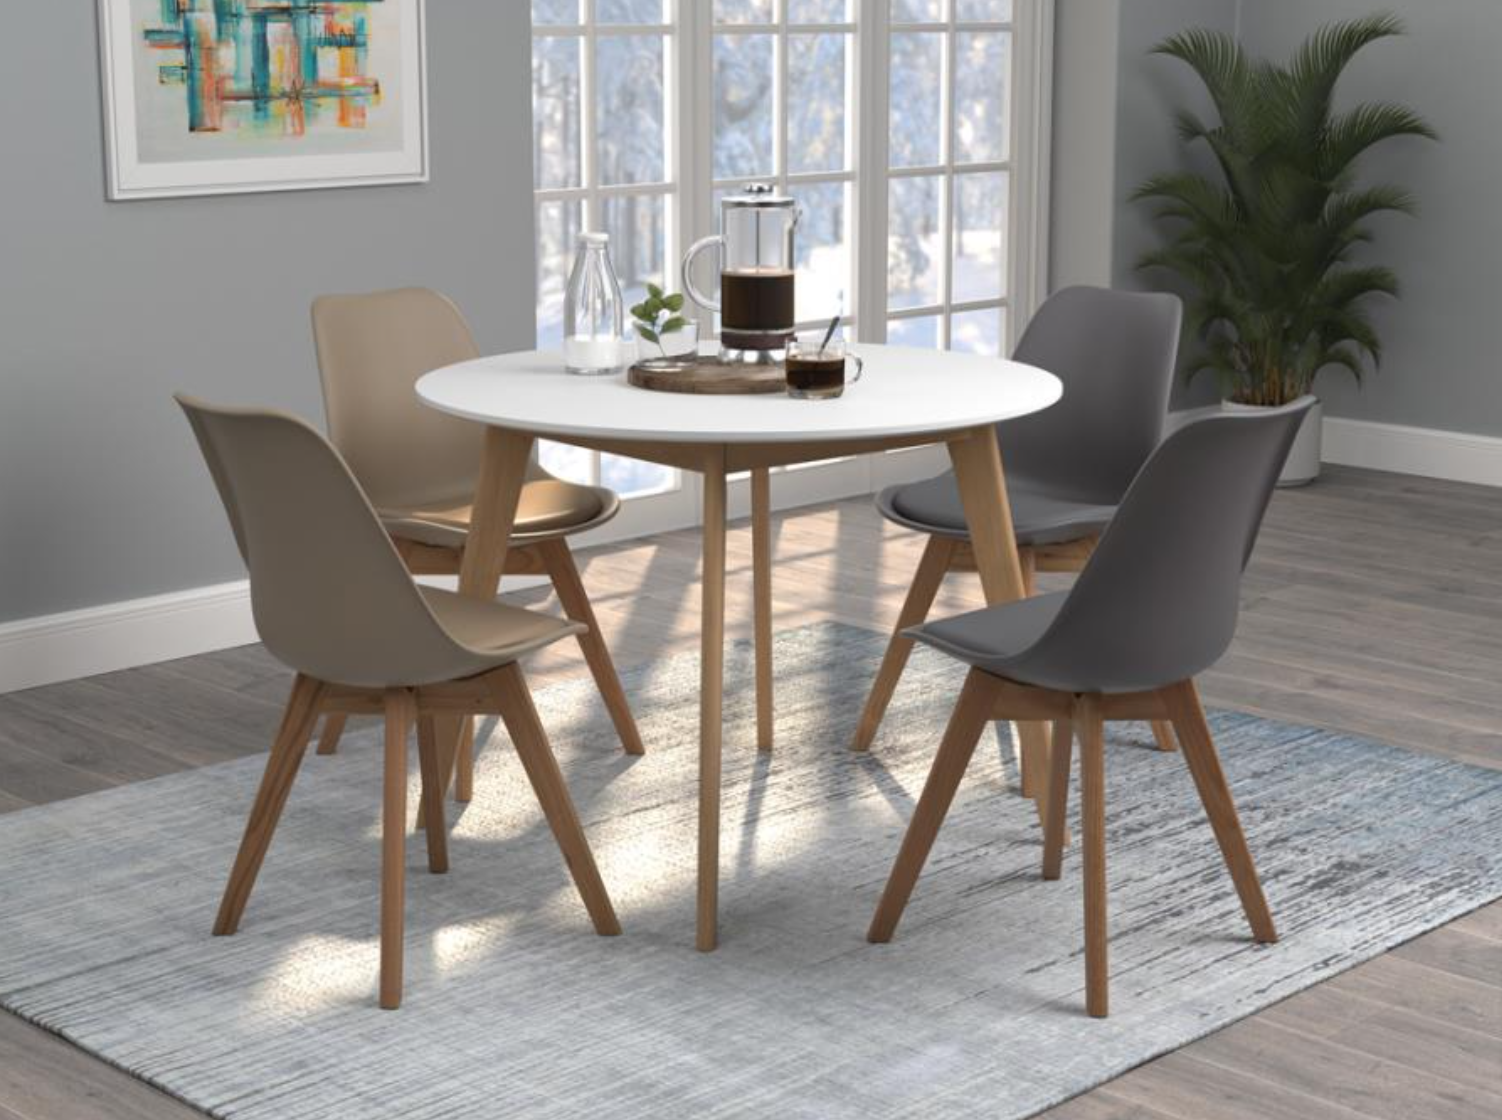 Breckenridge Collection Dining Chair - Gray